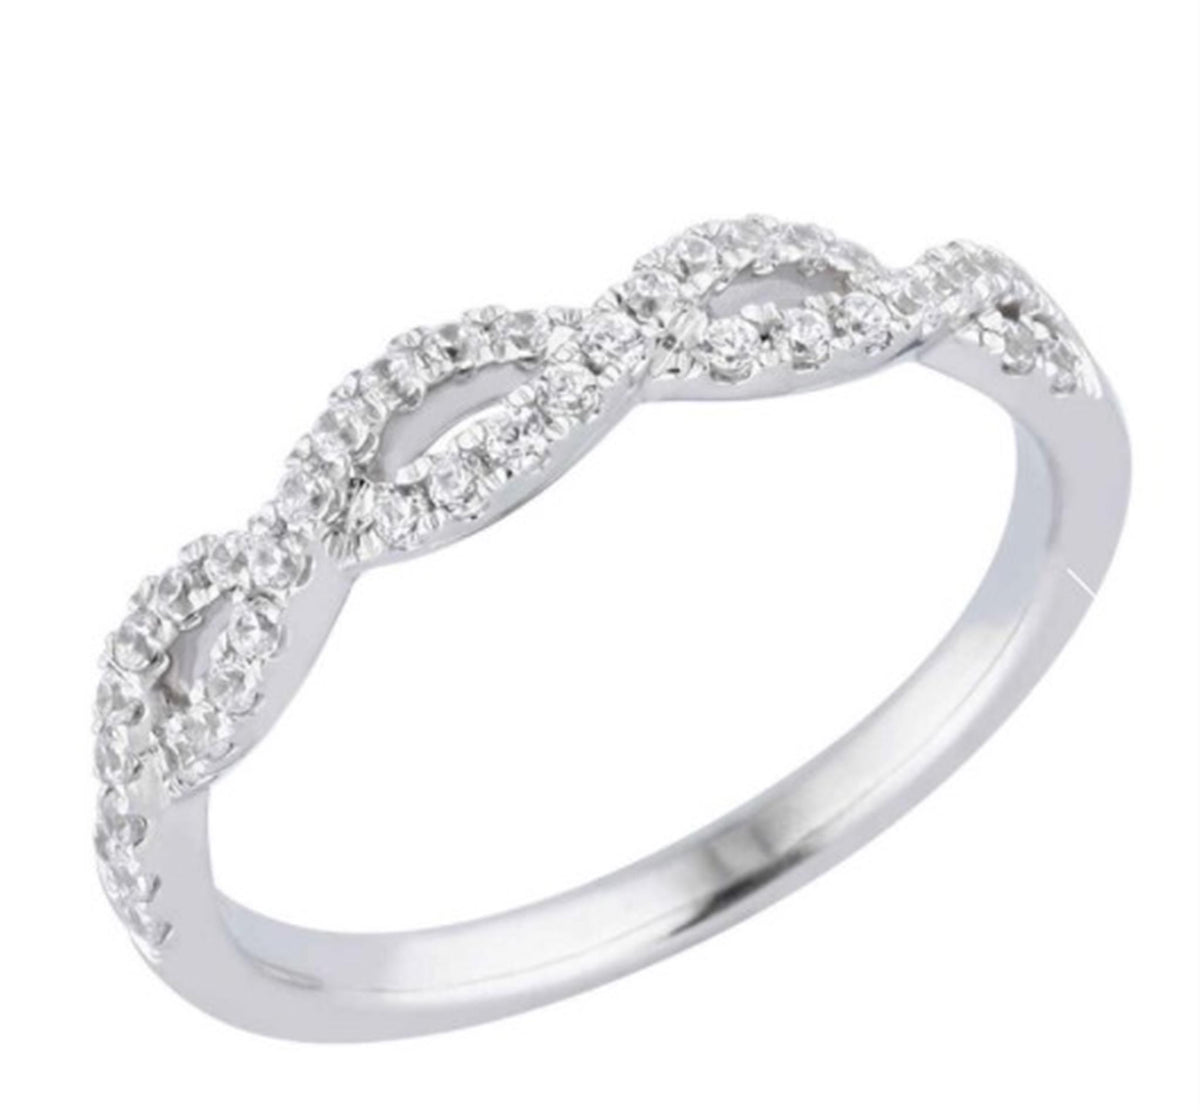 Infinity Twist 14Kt White Gold Stackable Wedding Ring With 0.27cttw Natural Diamonds